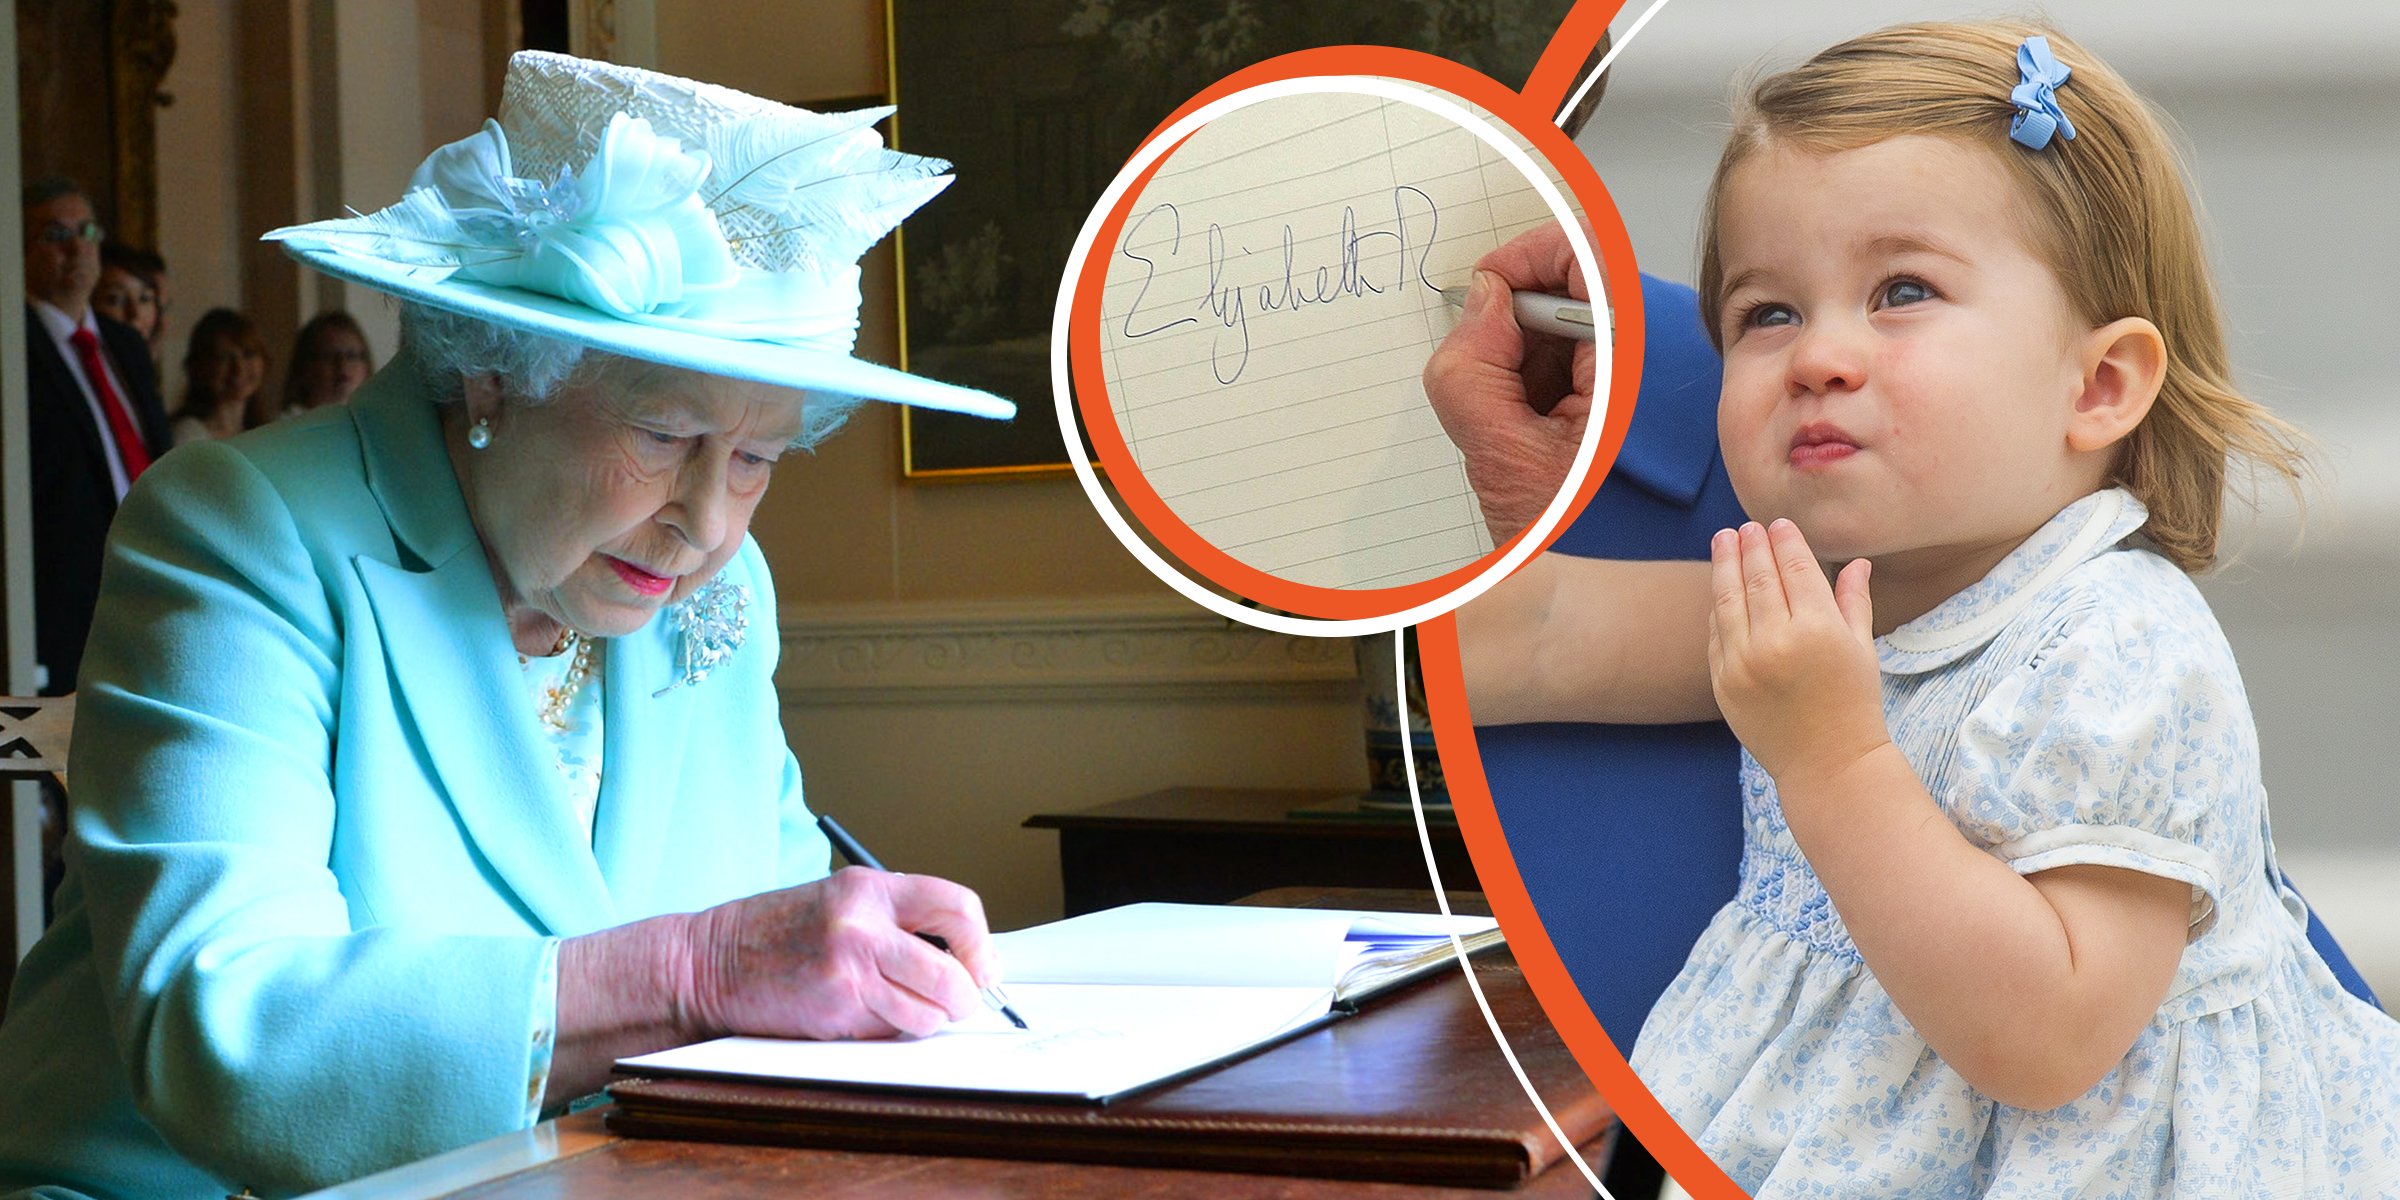 Queen Elizabeth II and Princess Charlotte. | Source: Getty Images